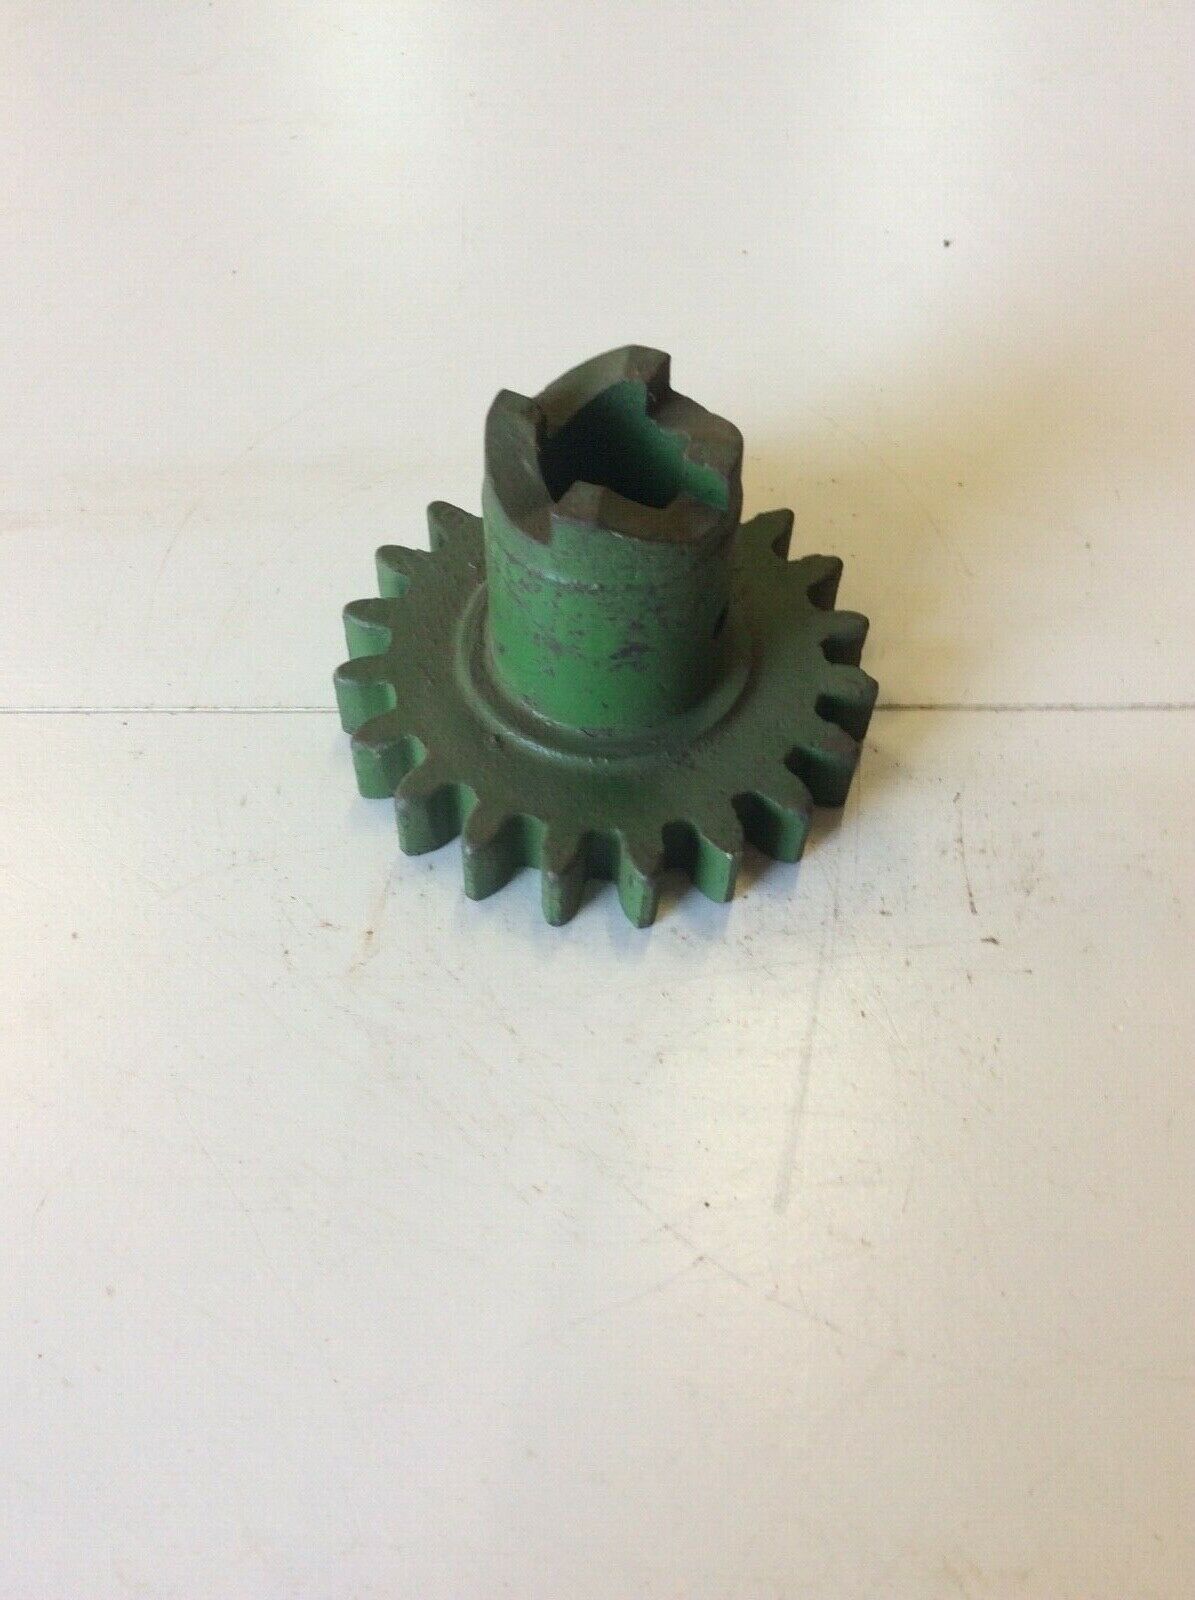 H456M John Deere NOS Feed Shaft Gear With 20 Teeth For Number 7 Fertilizer Distributor